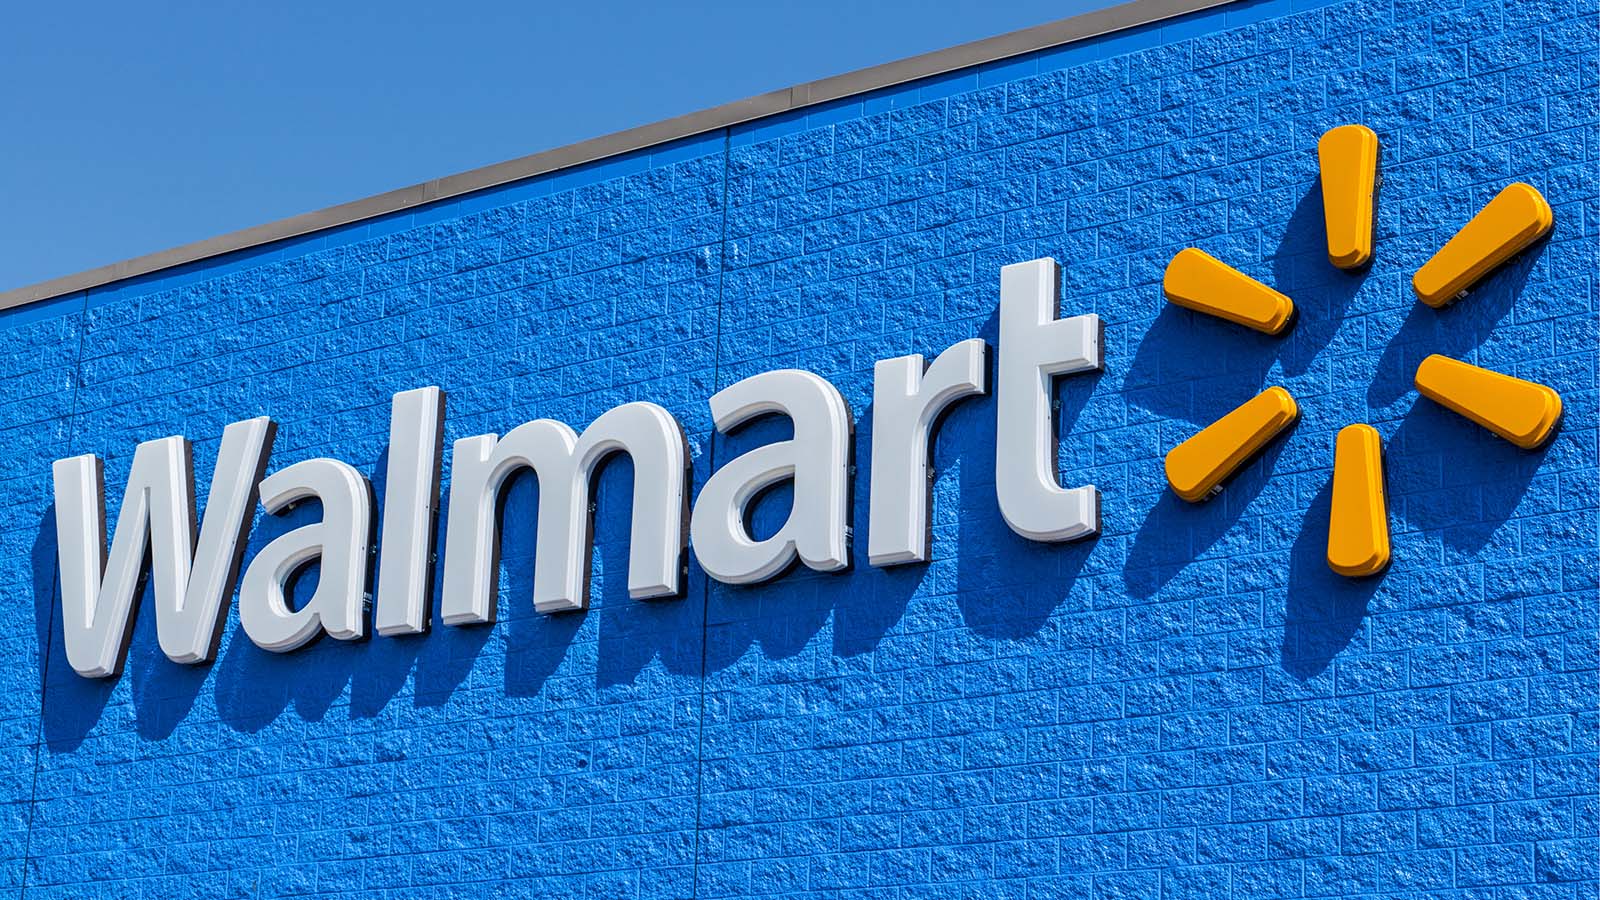 Image of Walmart (WMT stock) logo on Walmart store with clear blue sky in the background